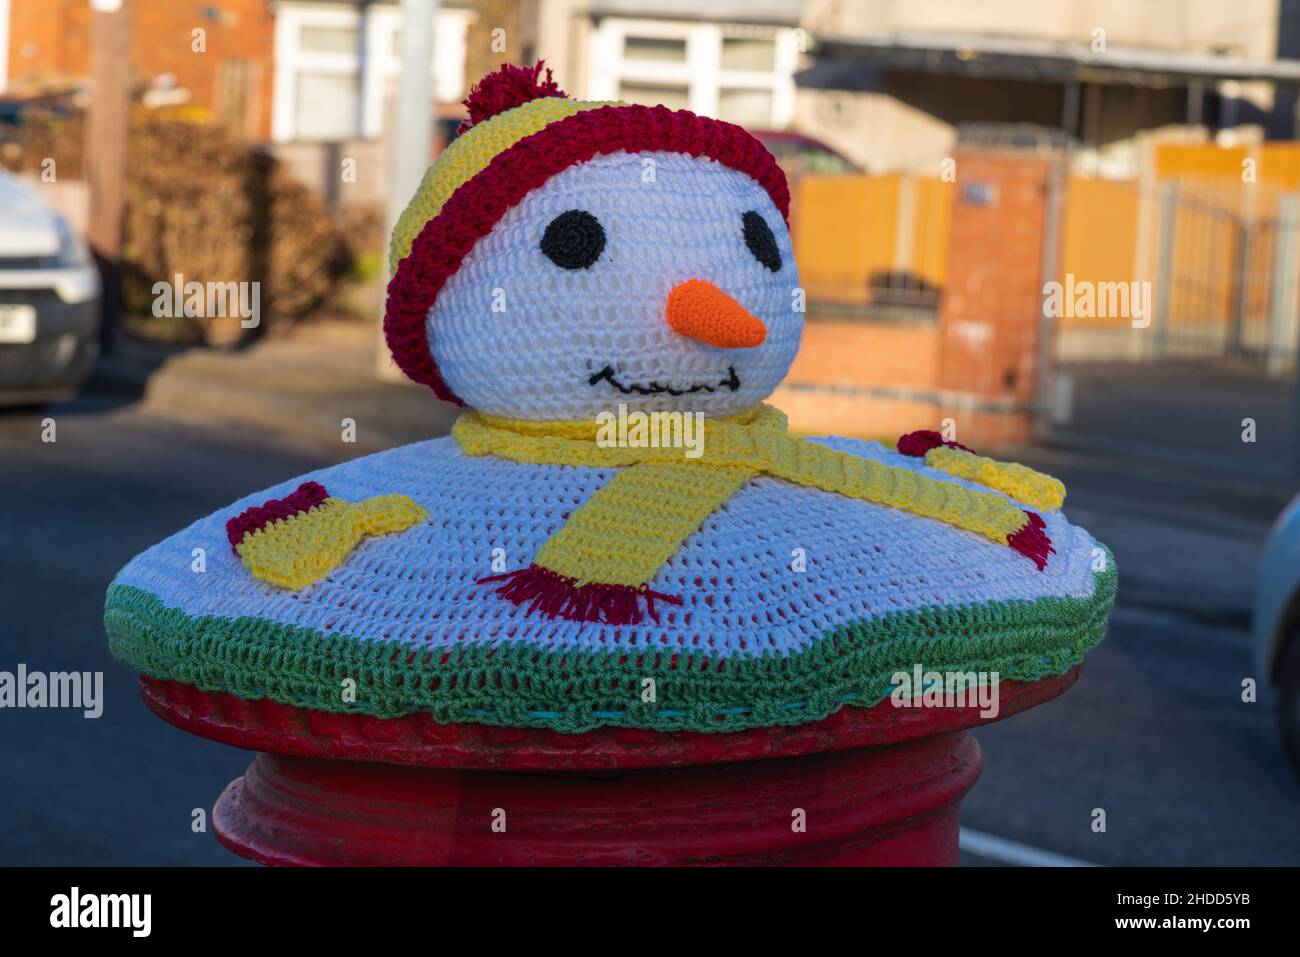 Red, postbox, post box, crocheted, Royal Mail, woolly hats, hand-knitted, pillar boxes, Lincoln City, bobble hat and scarf, The Snow Snowman, Xmas. Stock Photo